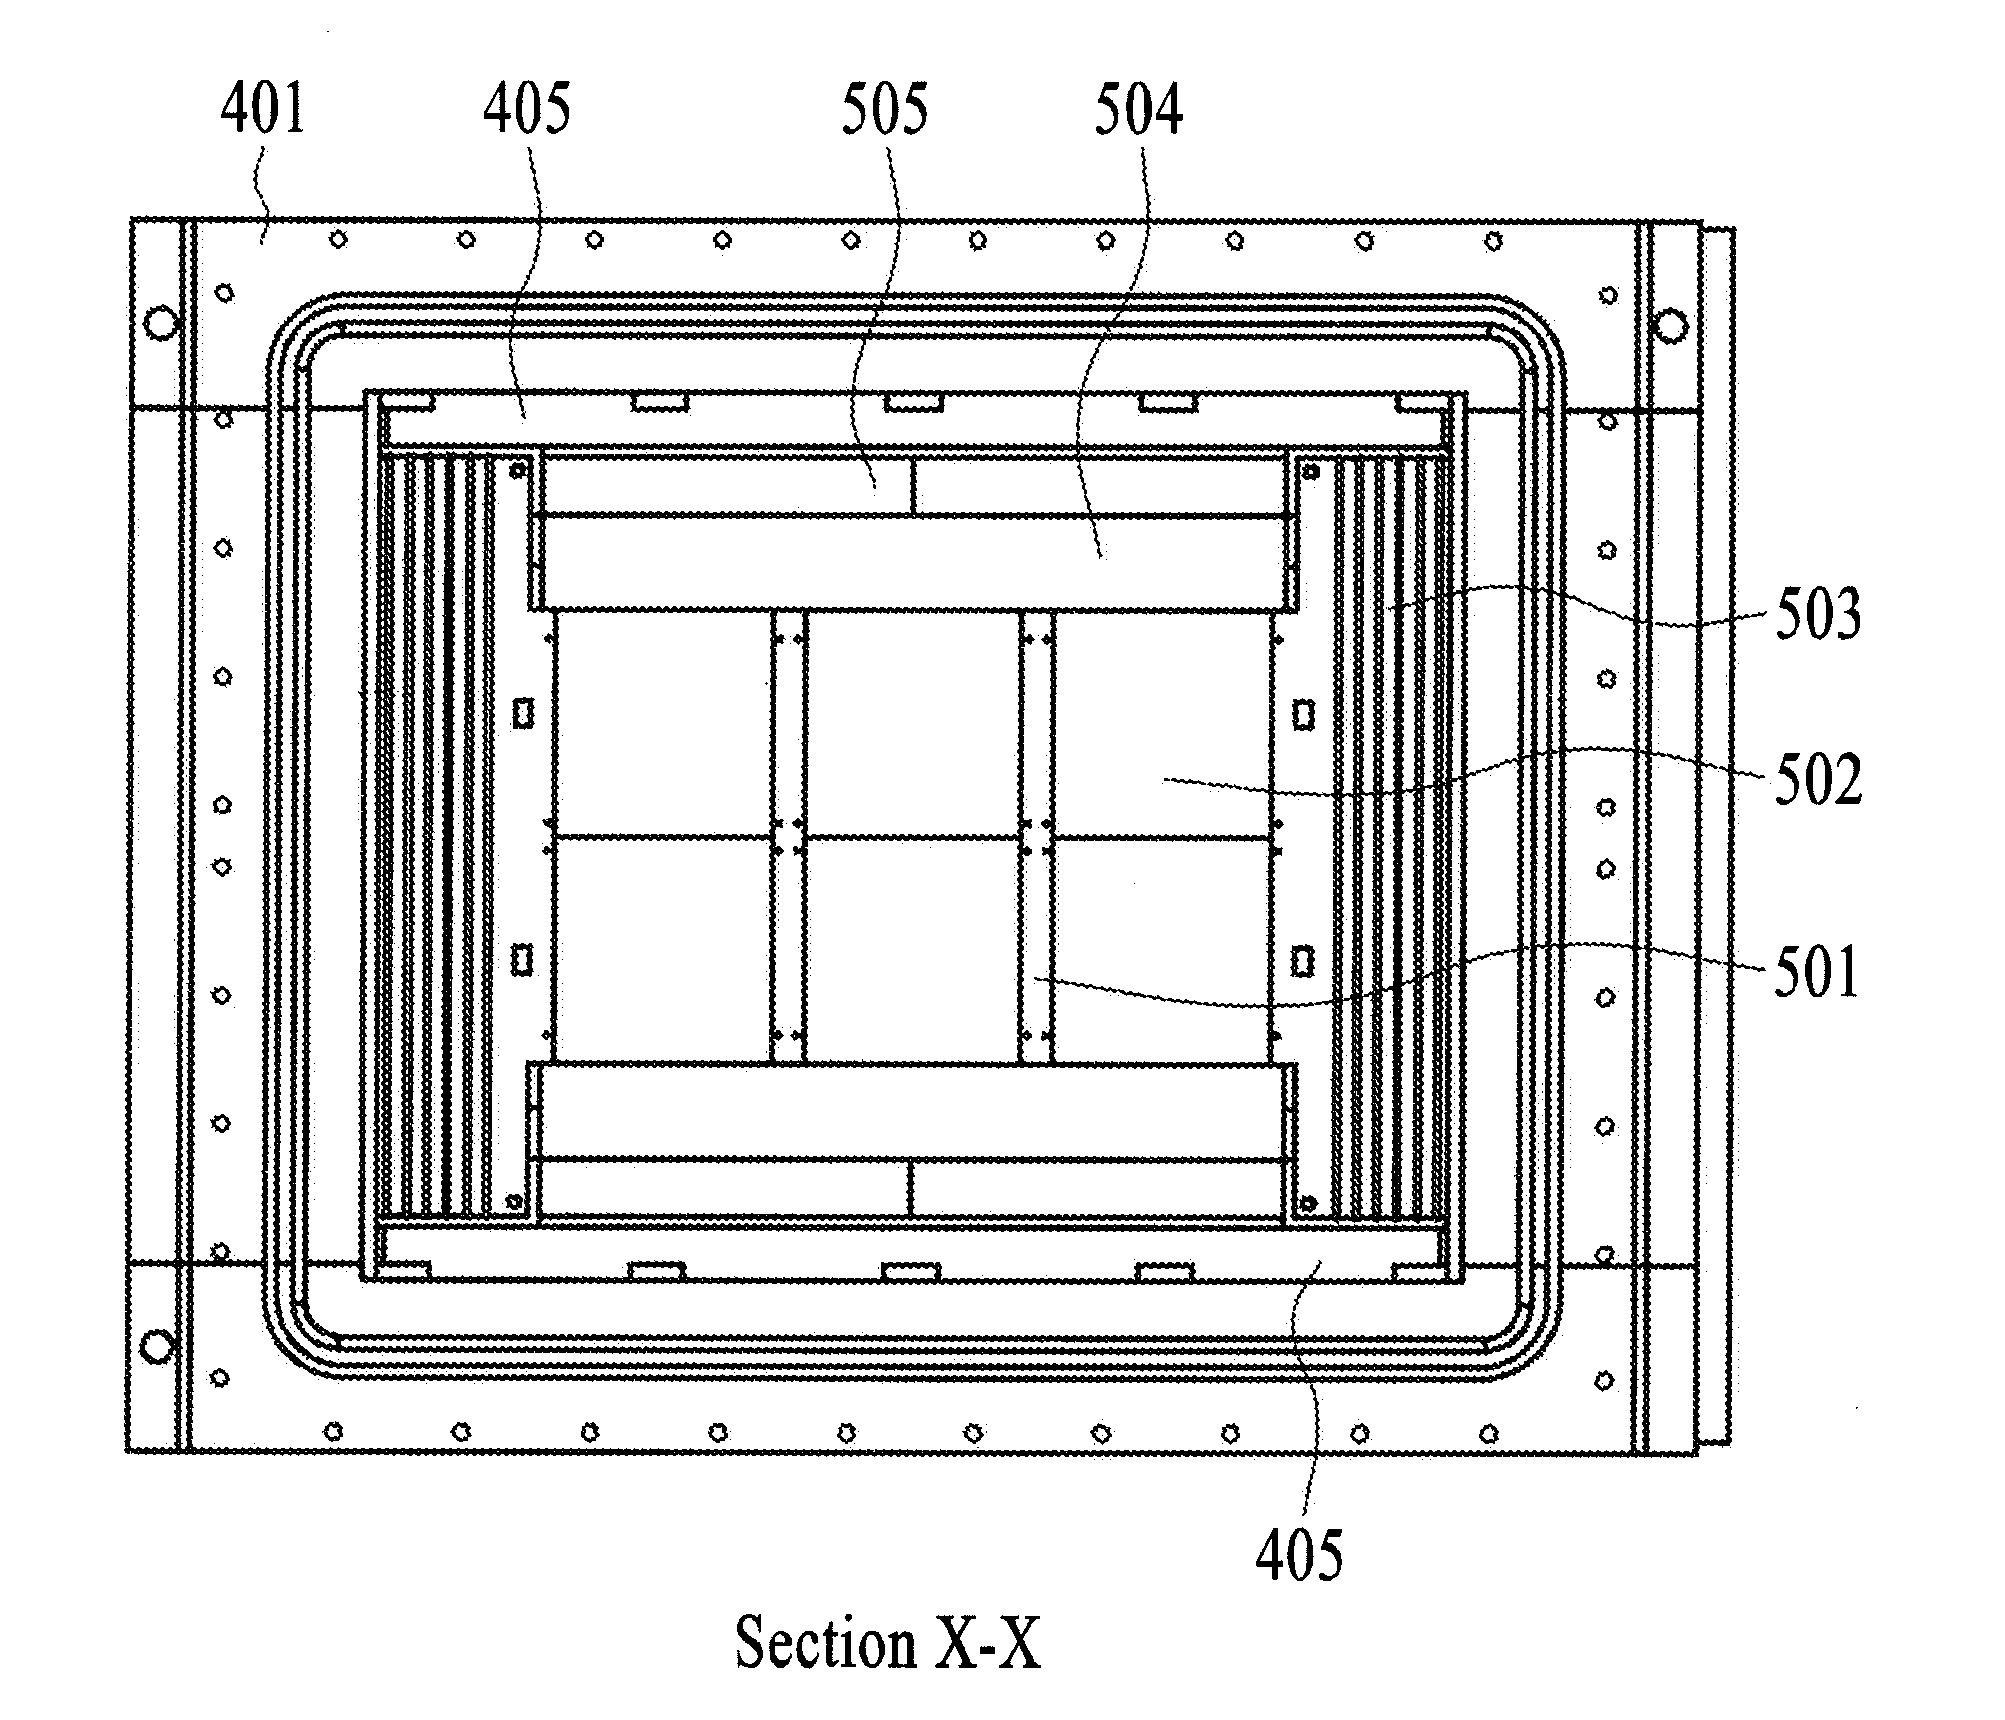 Silicon wafers by epitaxial deposition